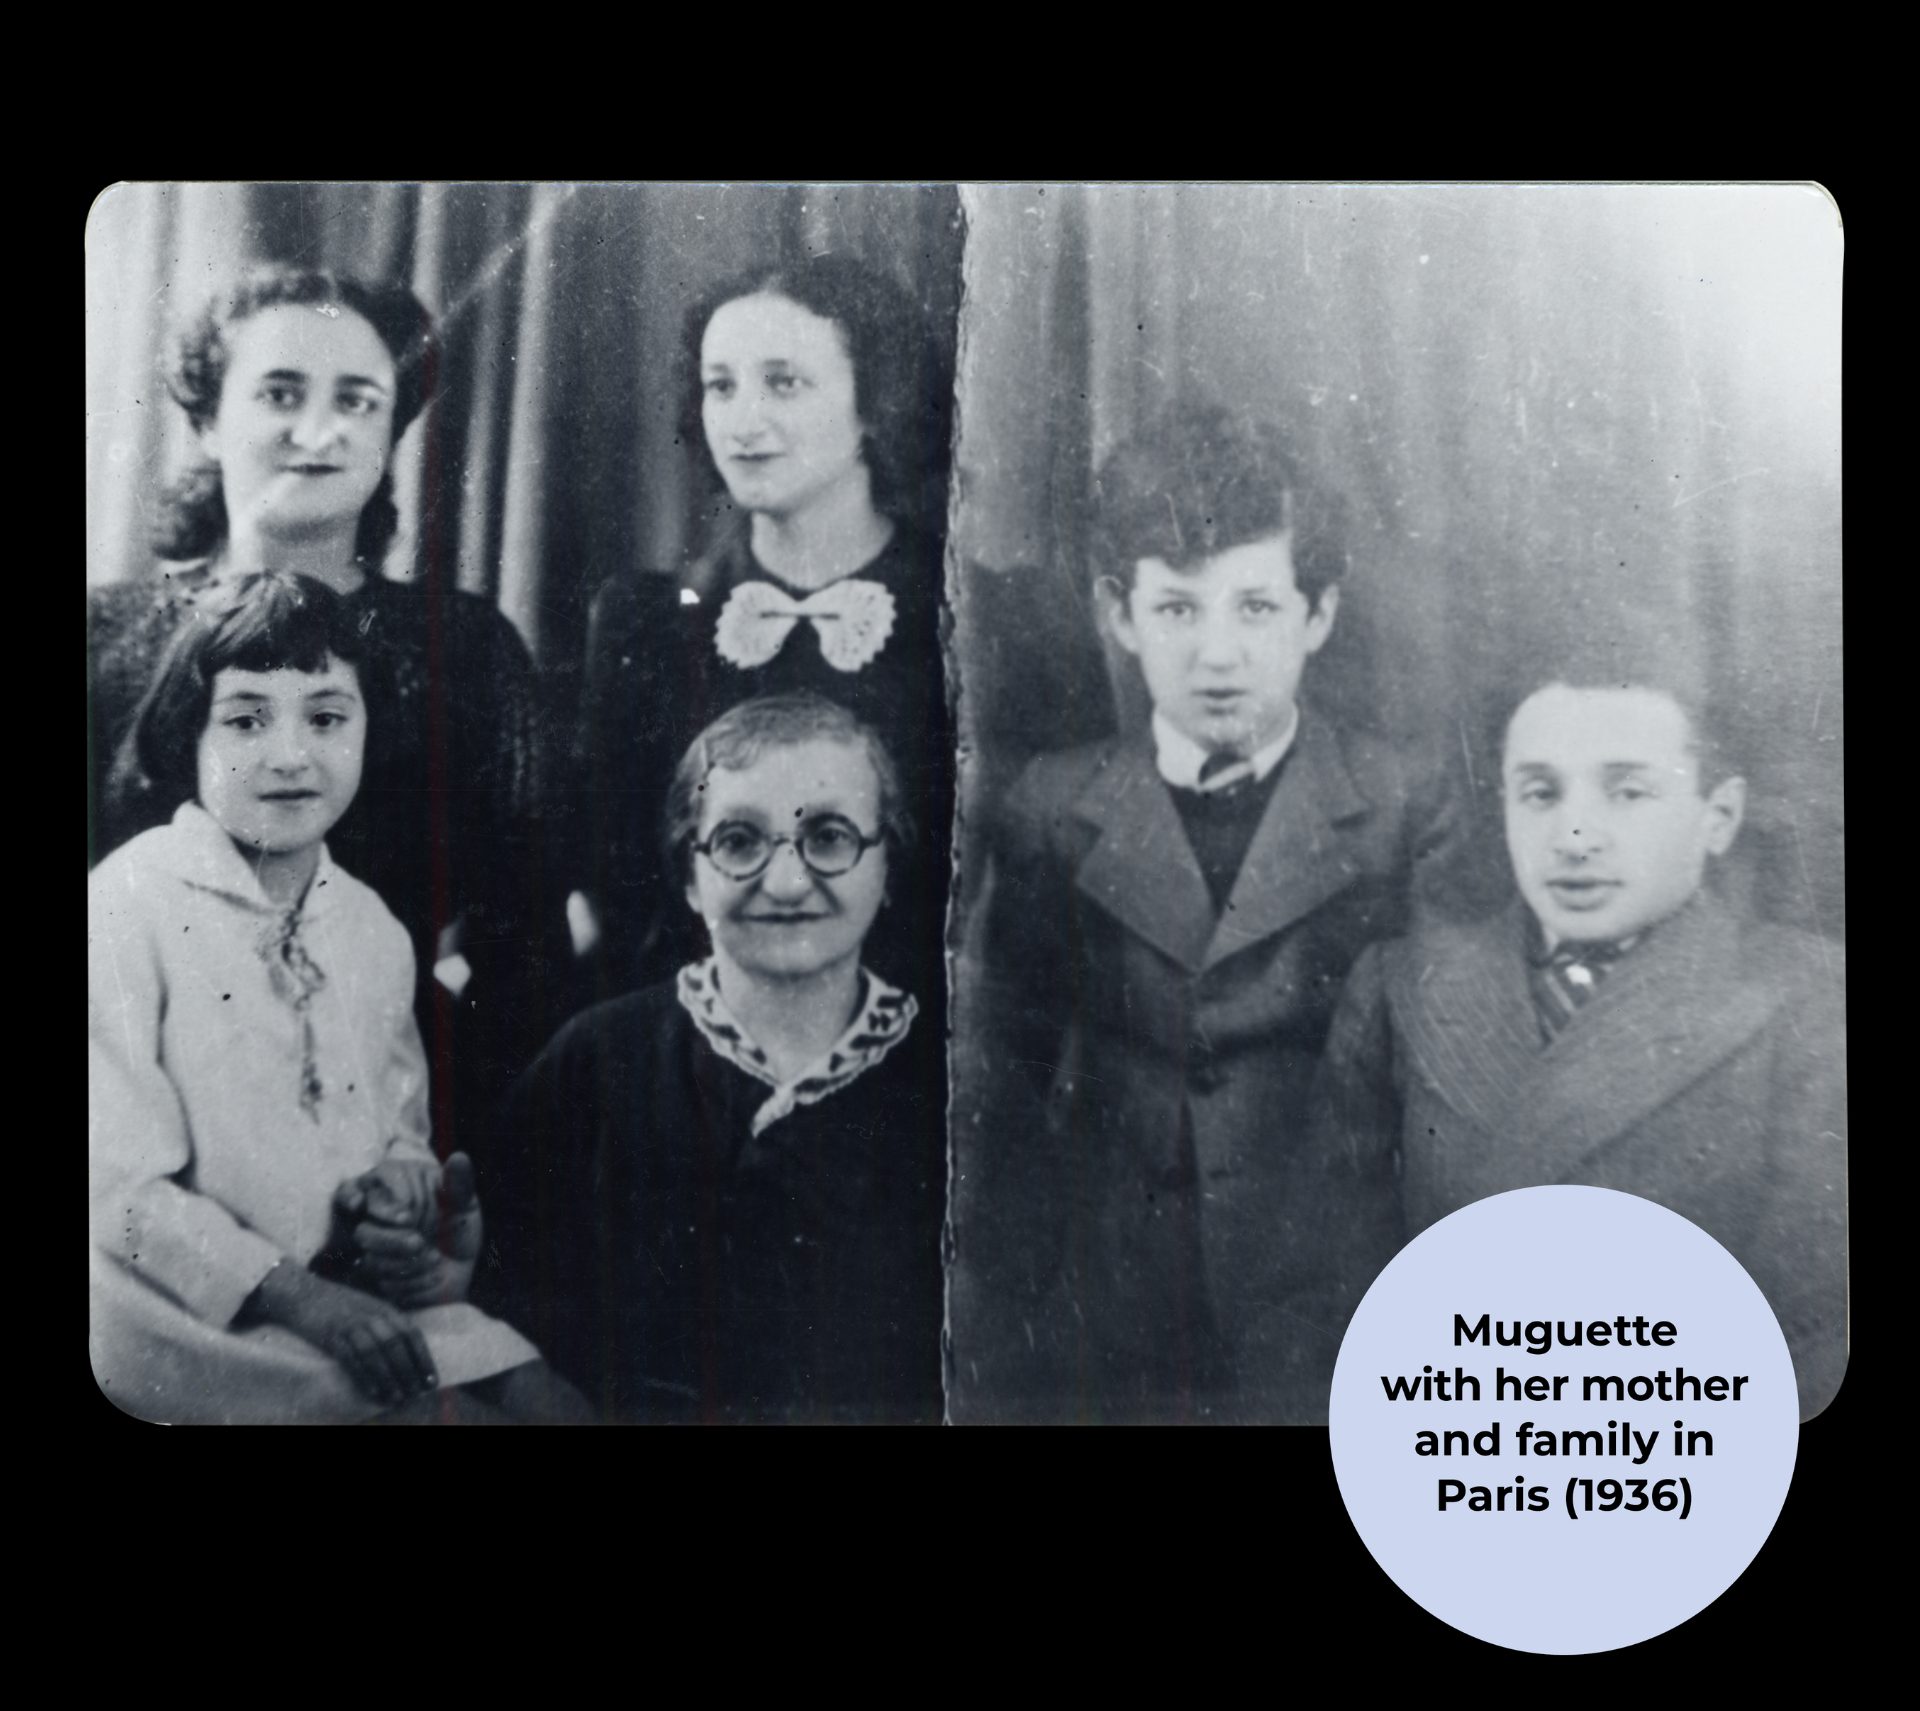 Muguette with her mother and family in Paris (1936)